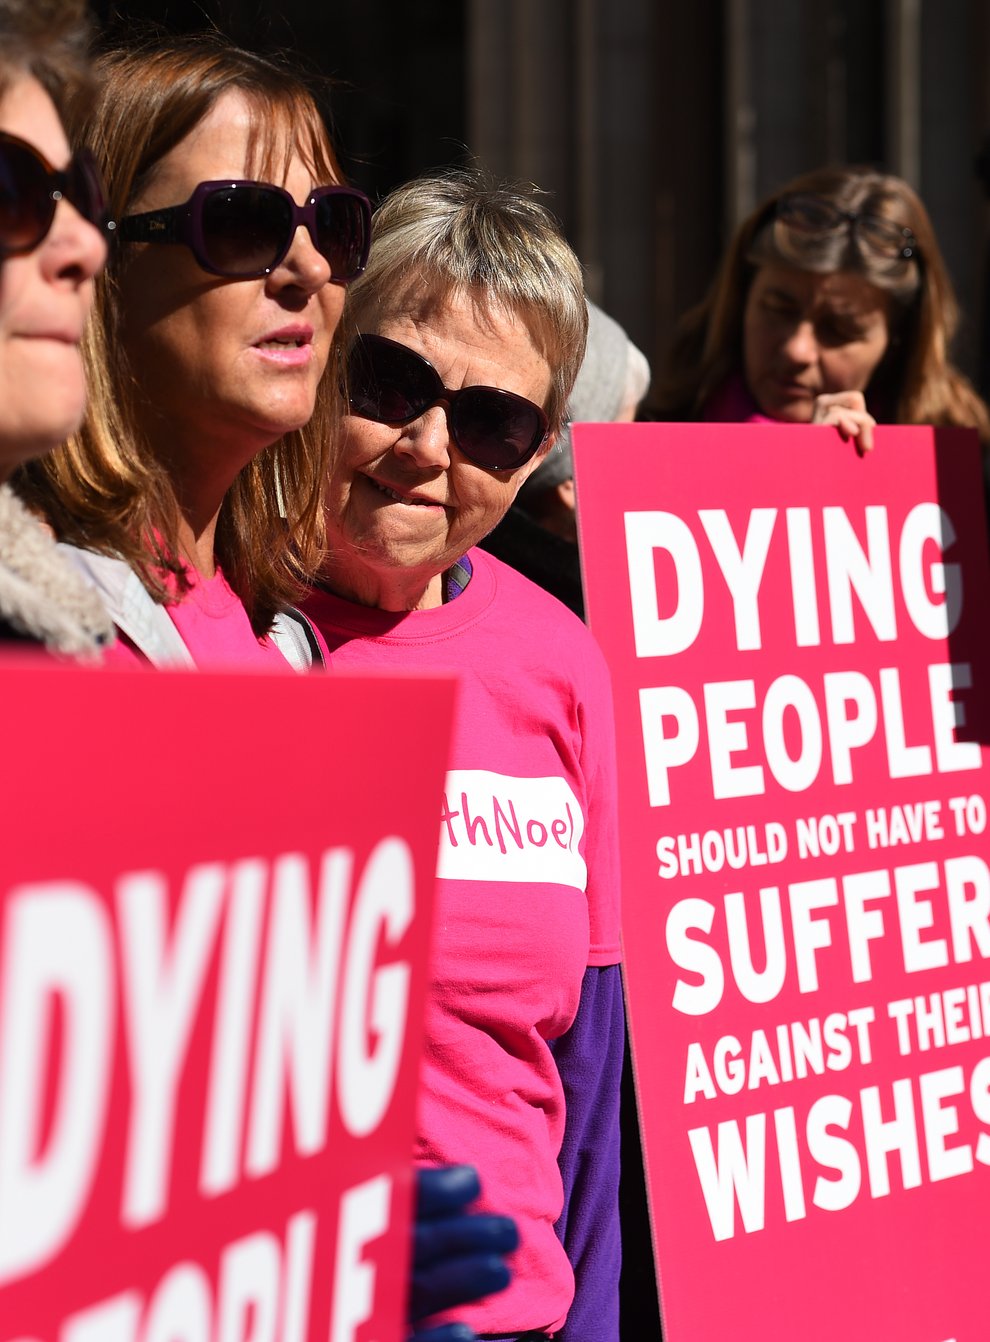 Hundreds of medical professionals have written an open letter to Health Secretary Sajid Javid, saying they oppose plans for a new law on assisted dying and will refuse to help people take their own lives (Kirsty O’Connor/PA)